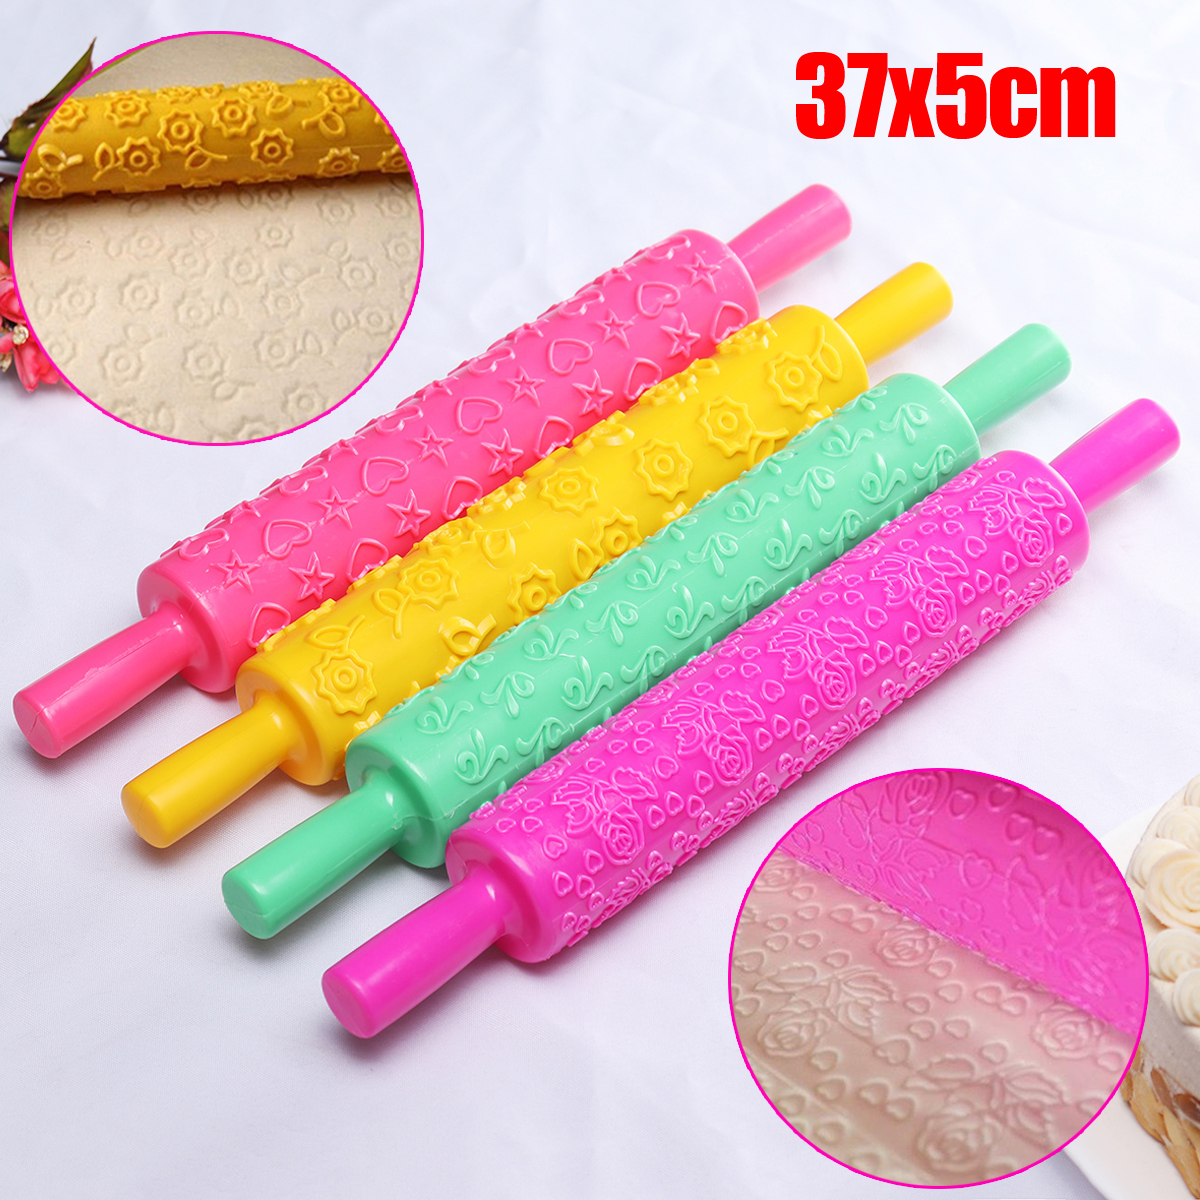 Baking-Rolling-Pin-Christmas-Creative-Baking-Biscuits-Cookie-Rolling-Rod-Pin-Printing-Mold-1410720-4